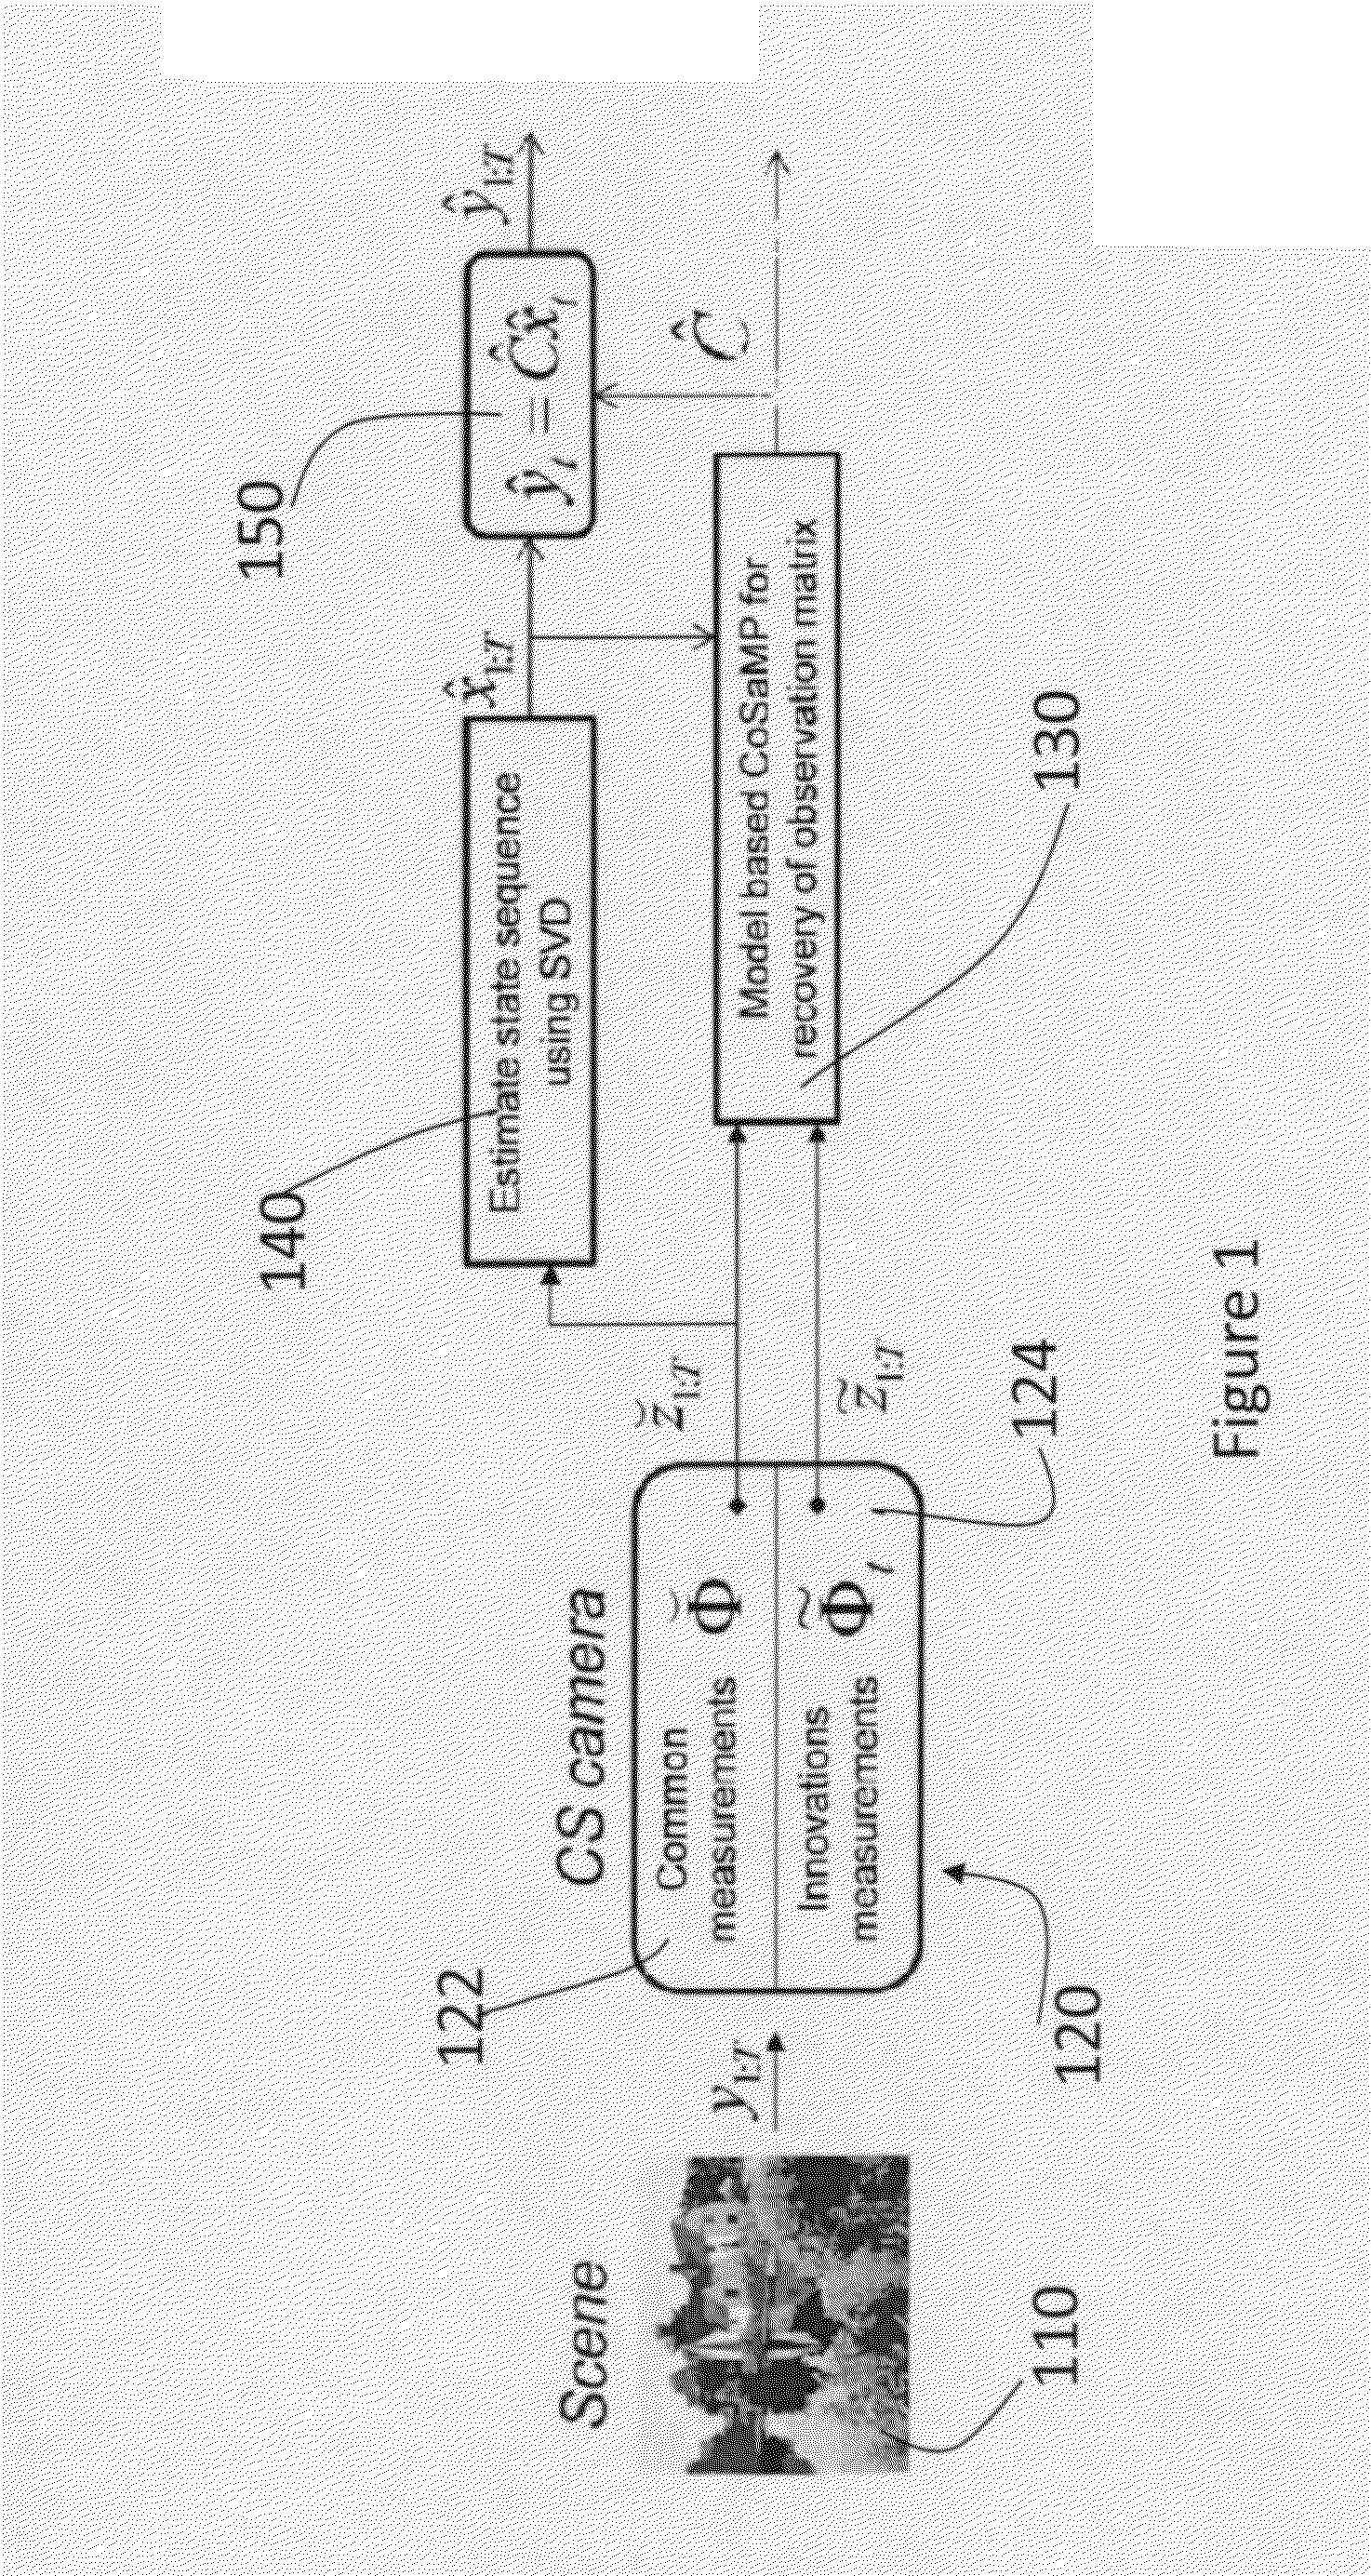 Method and apparatus for compressive acquisition and recovery of dynamic imagery